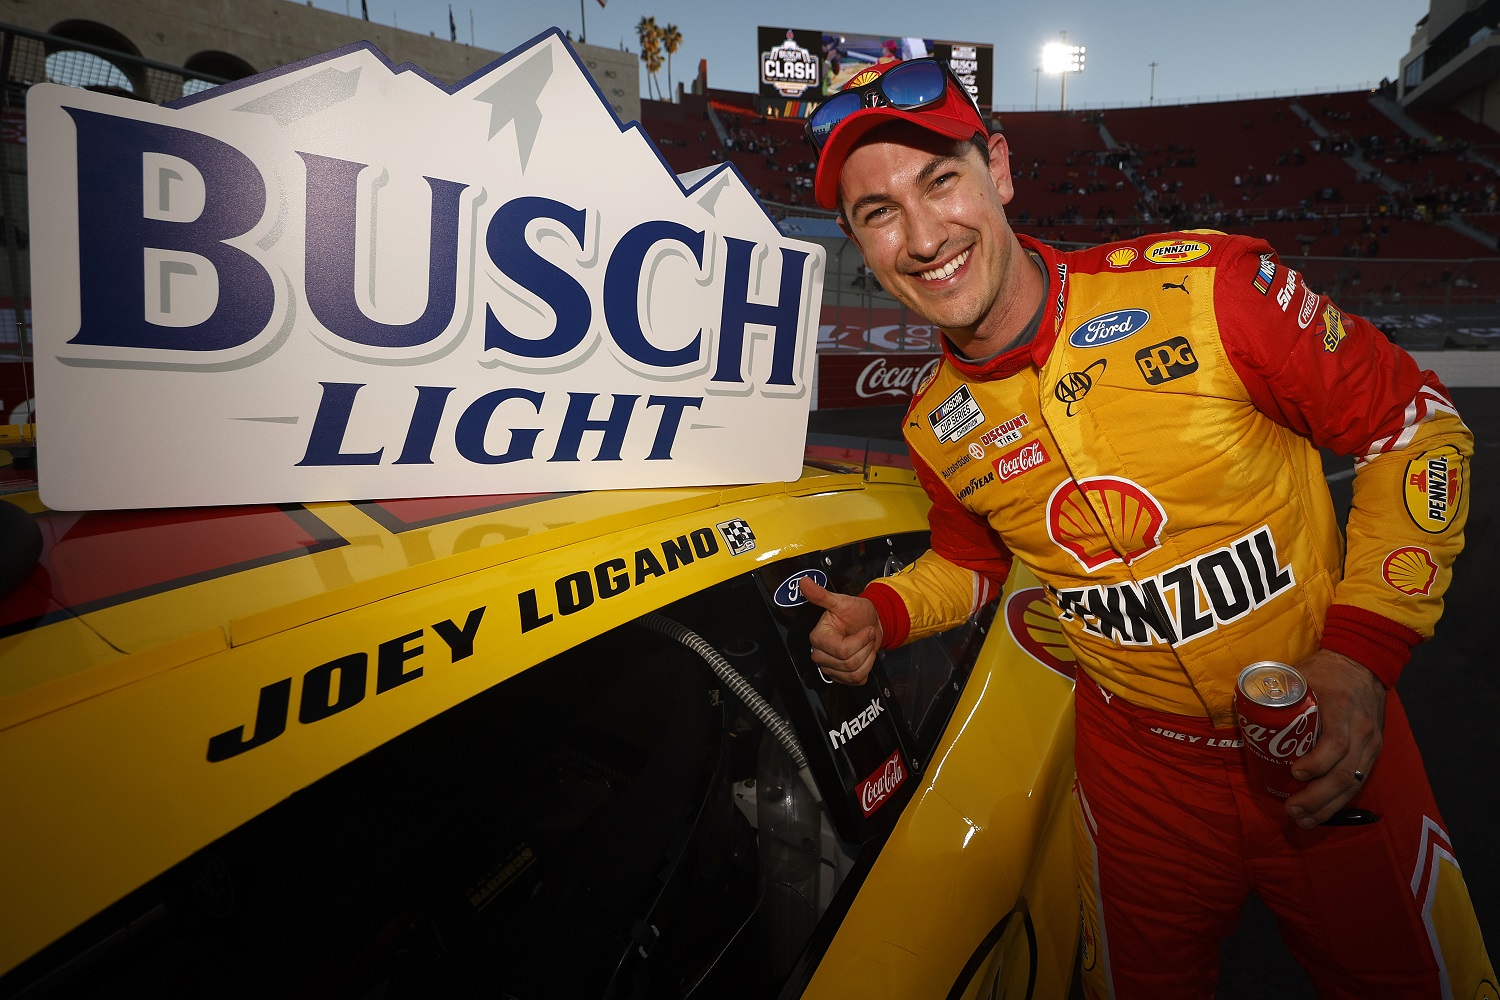 Joey Logano, driver of the No. 22 Ford, poses in Victory Lane after winning the NASCAR Cup Series Busch Light Clash at the Los Angeles Memorial Coliseum. | Chris Graythen/Getty Images